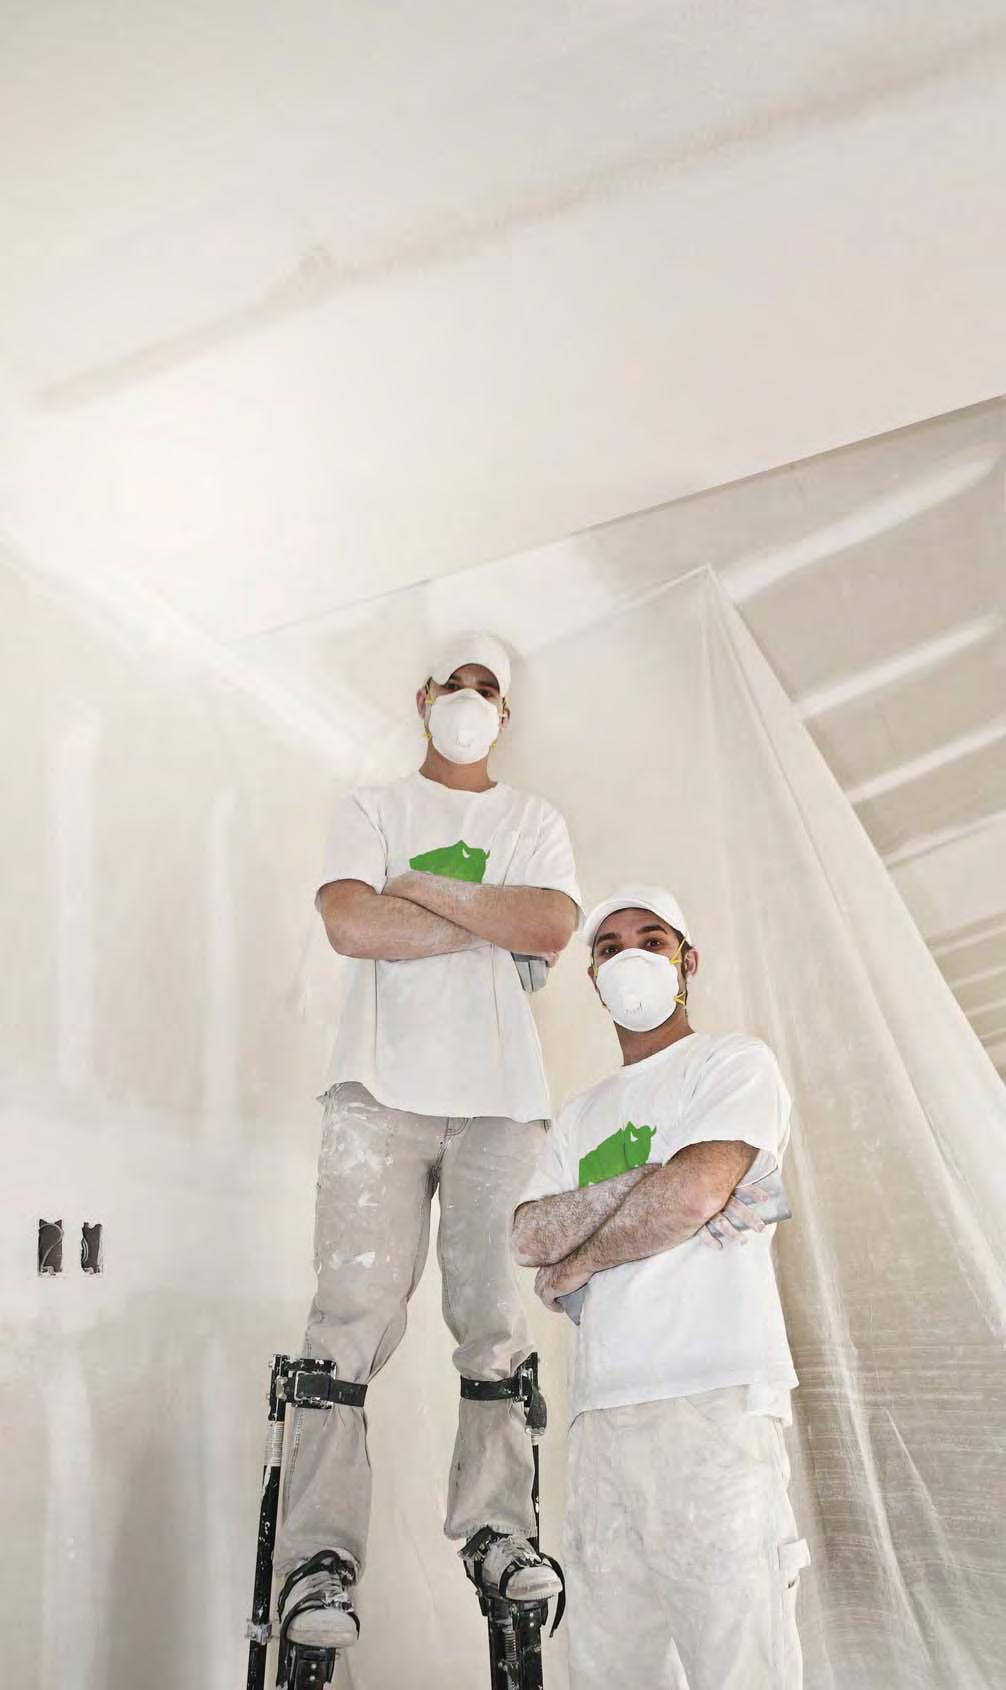 LAFARGE GYPSUM IS NOW CONSISTENT BUILD BISON STRONG Count on Continental Building Products to deliver consistent, sustainable, high-quality drywall and finishing products alongside the responsive